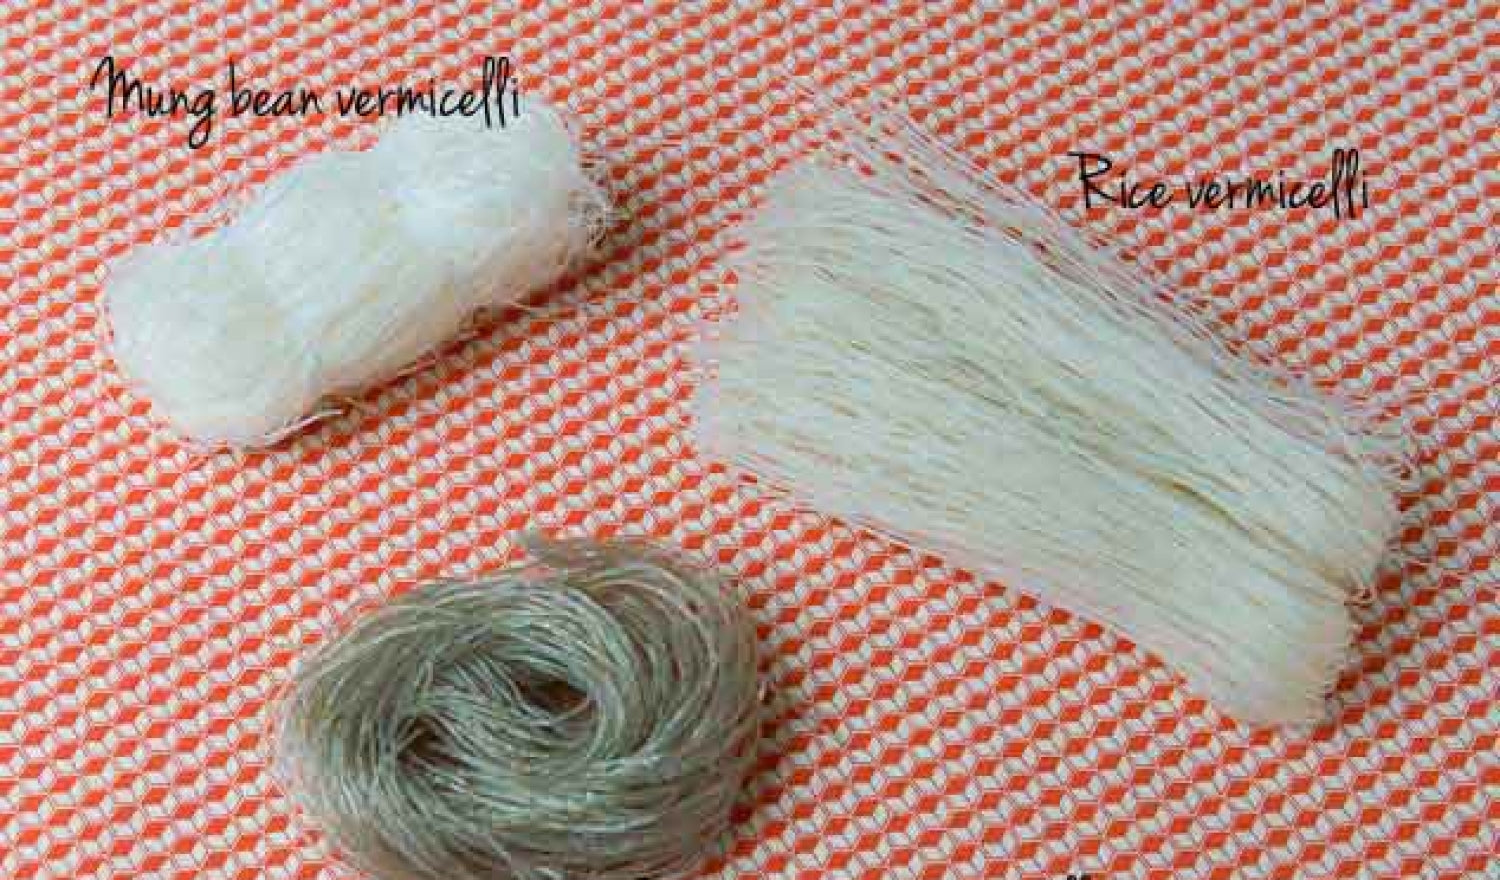 Know The Ingredient: What Are Glass Noodles?